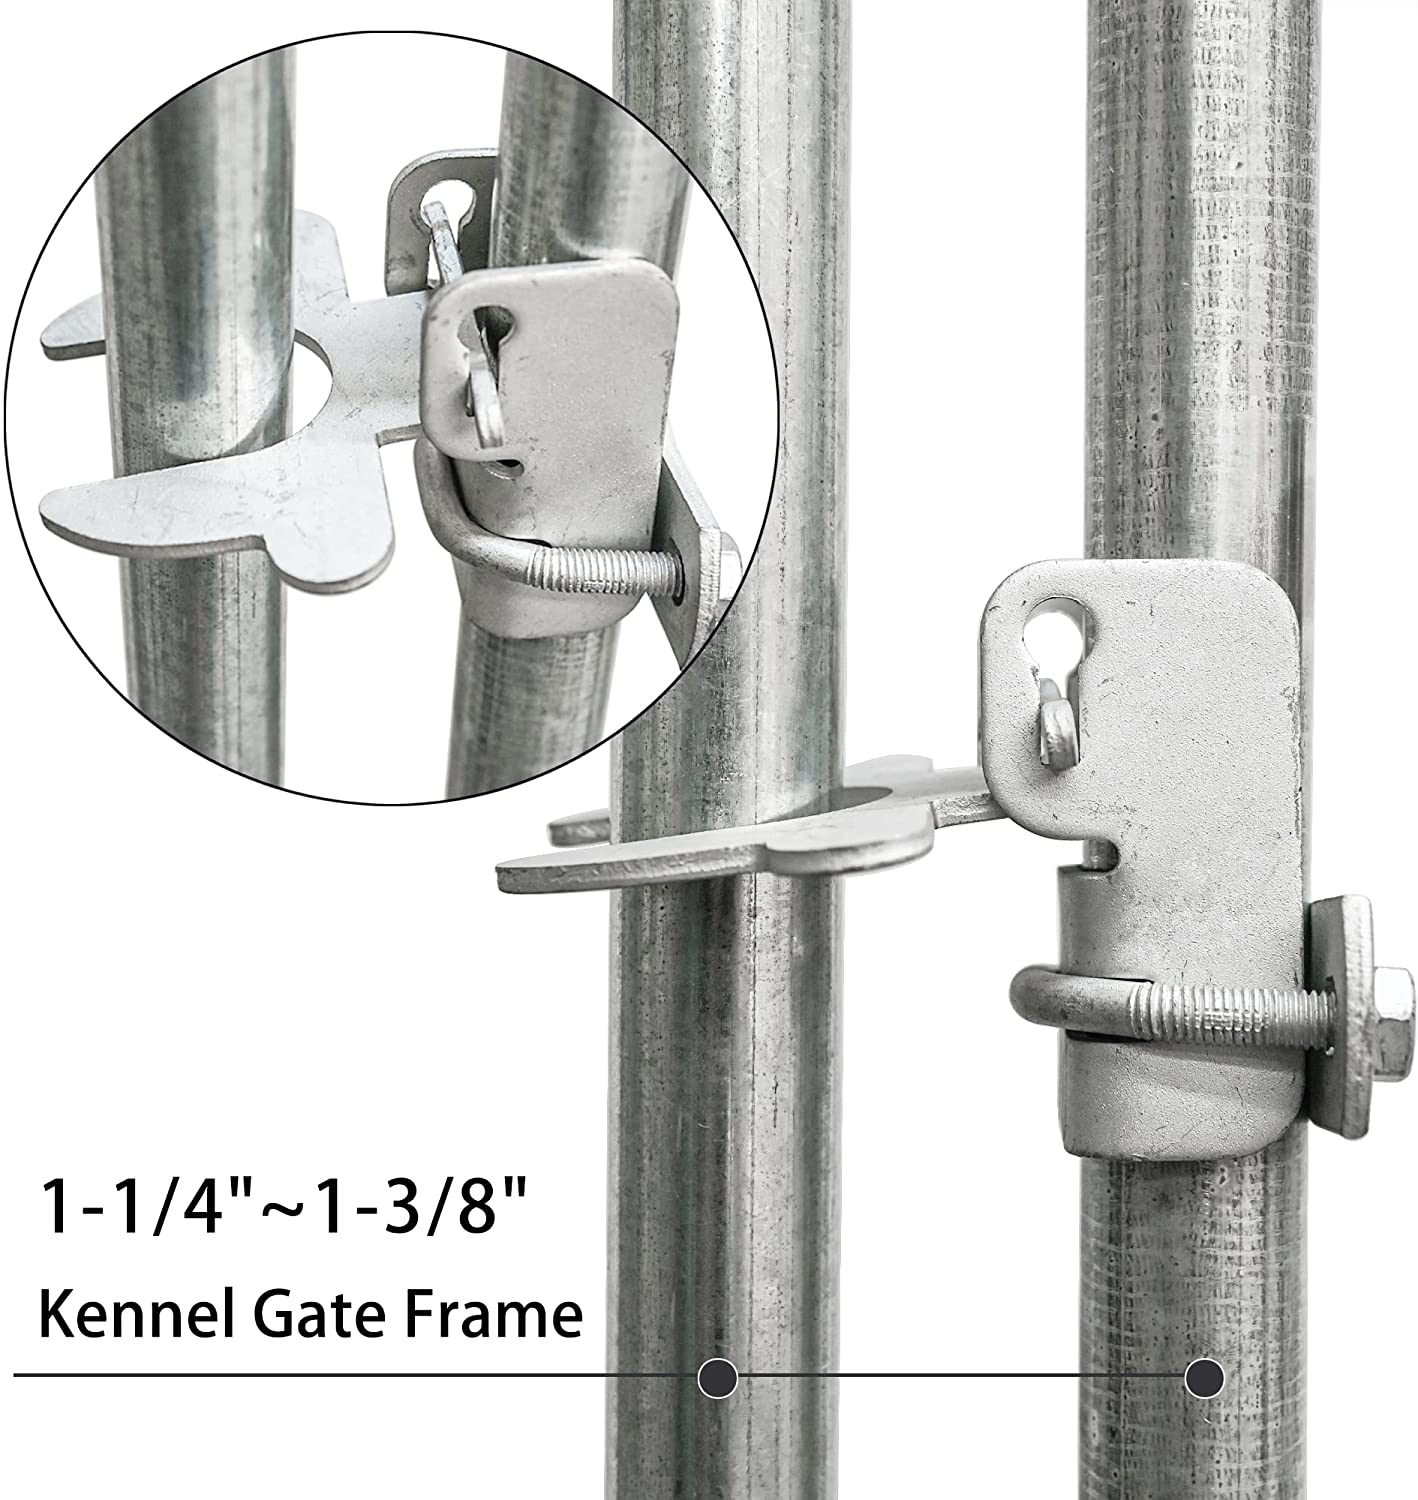 HITTITE Kennel Gate Latch, Butterfly Latches for Dog Kennels and Kennel Panels from 1-1/4'' to 1-3/8" Kennel Gate Frame & from 1-1/4'' to 1-3/8" Dog Kennel Panel Frame